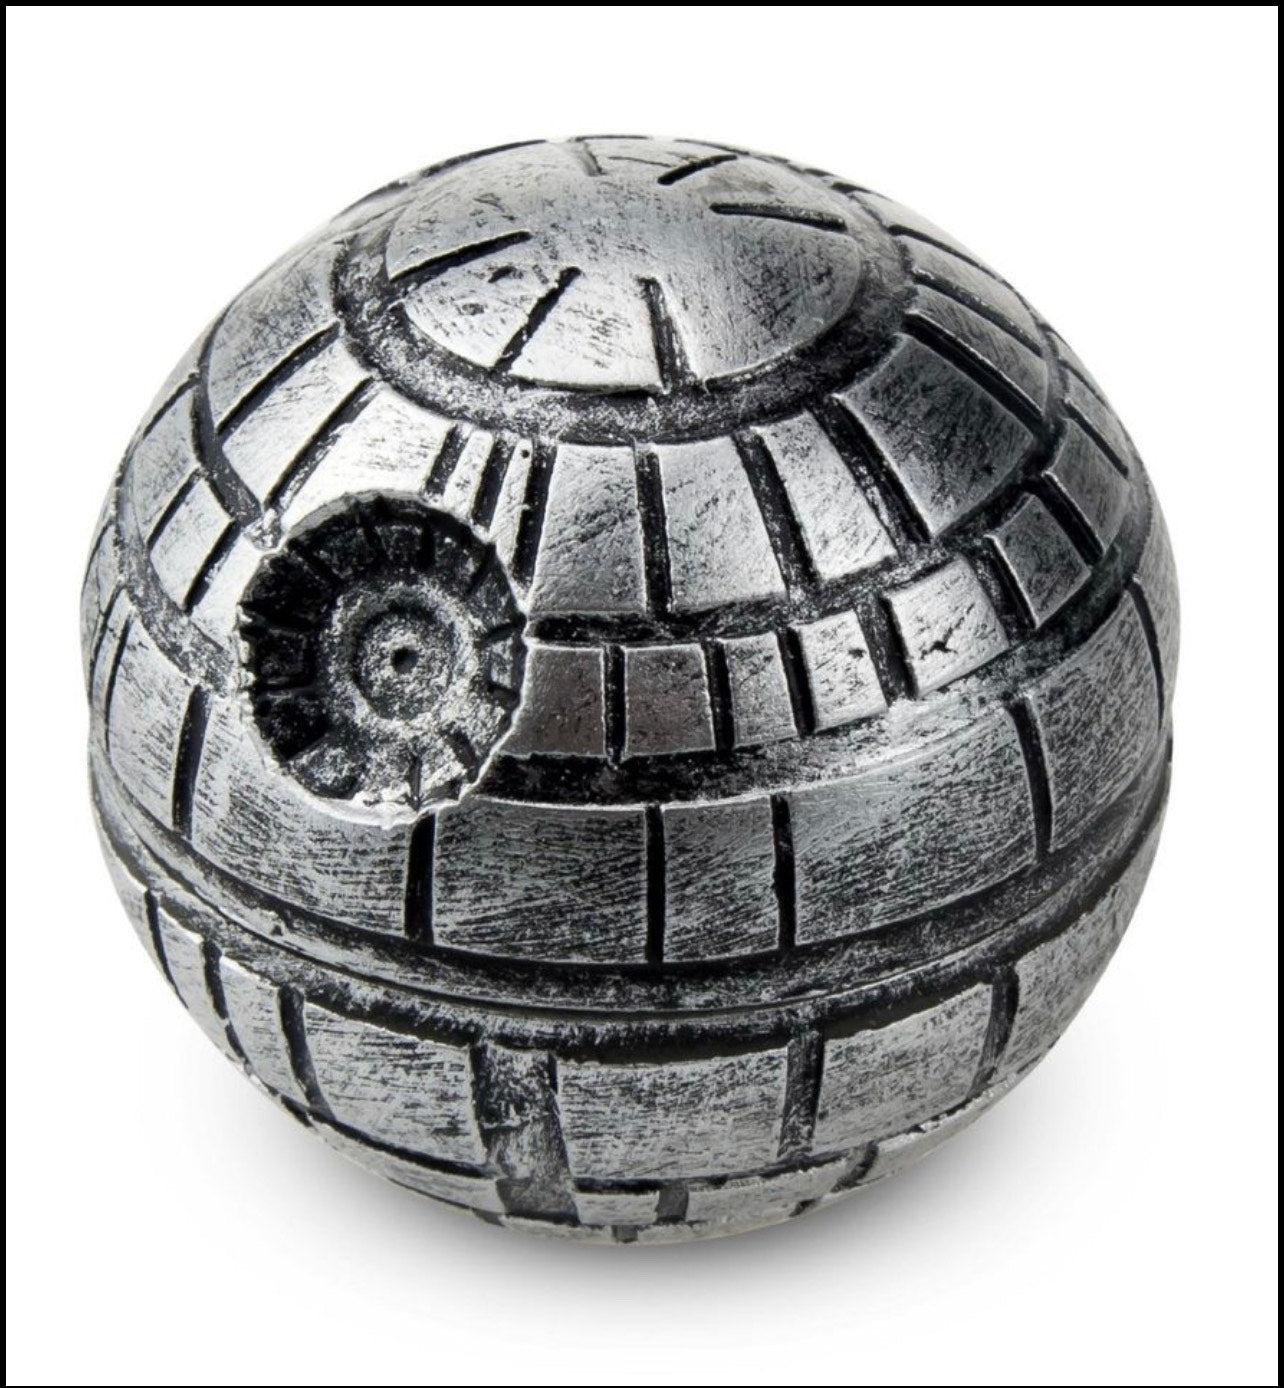 Death Star Grinder Grinder - The Force Gifts - 3 Pieces Jedi kitchenware gift The Force.